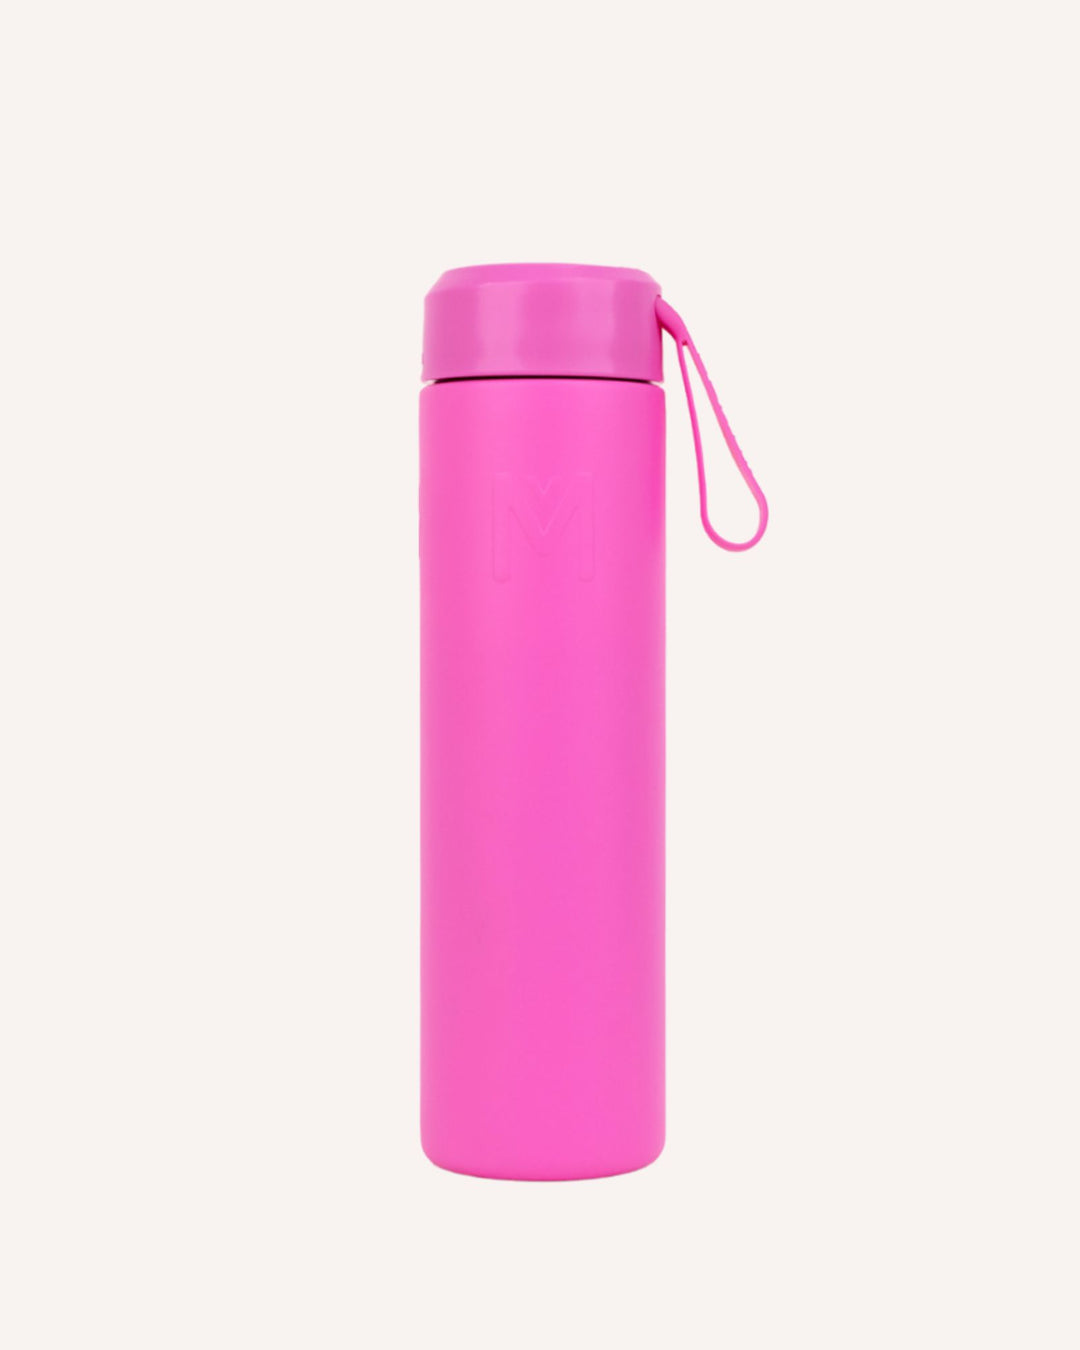 Mega Dishwasher Safe Insulated Drink Bottle 1000ml Strawberry by Montii Co.  – Yum Yum Kids Store